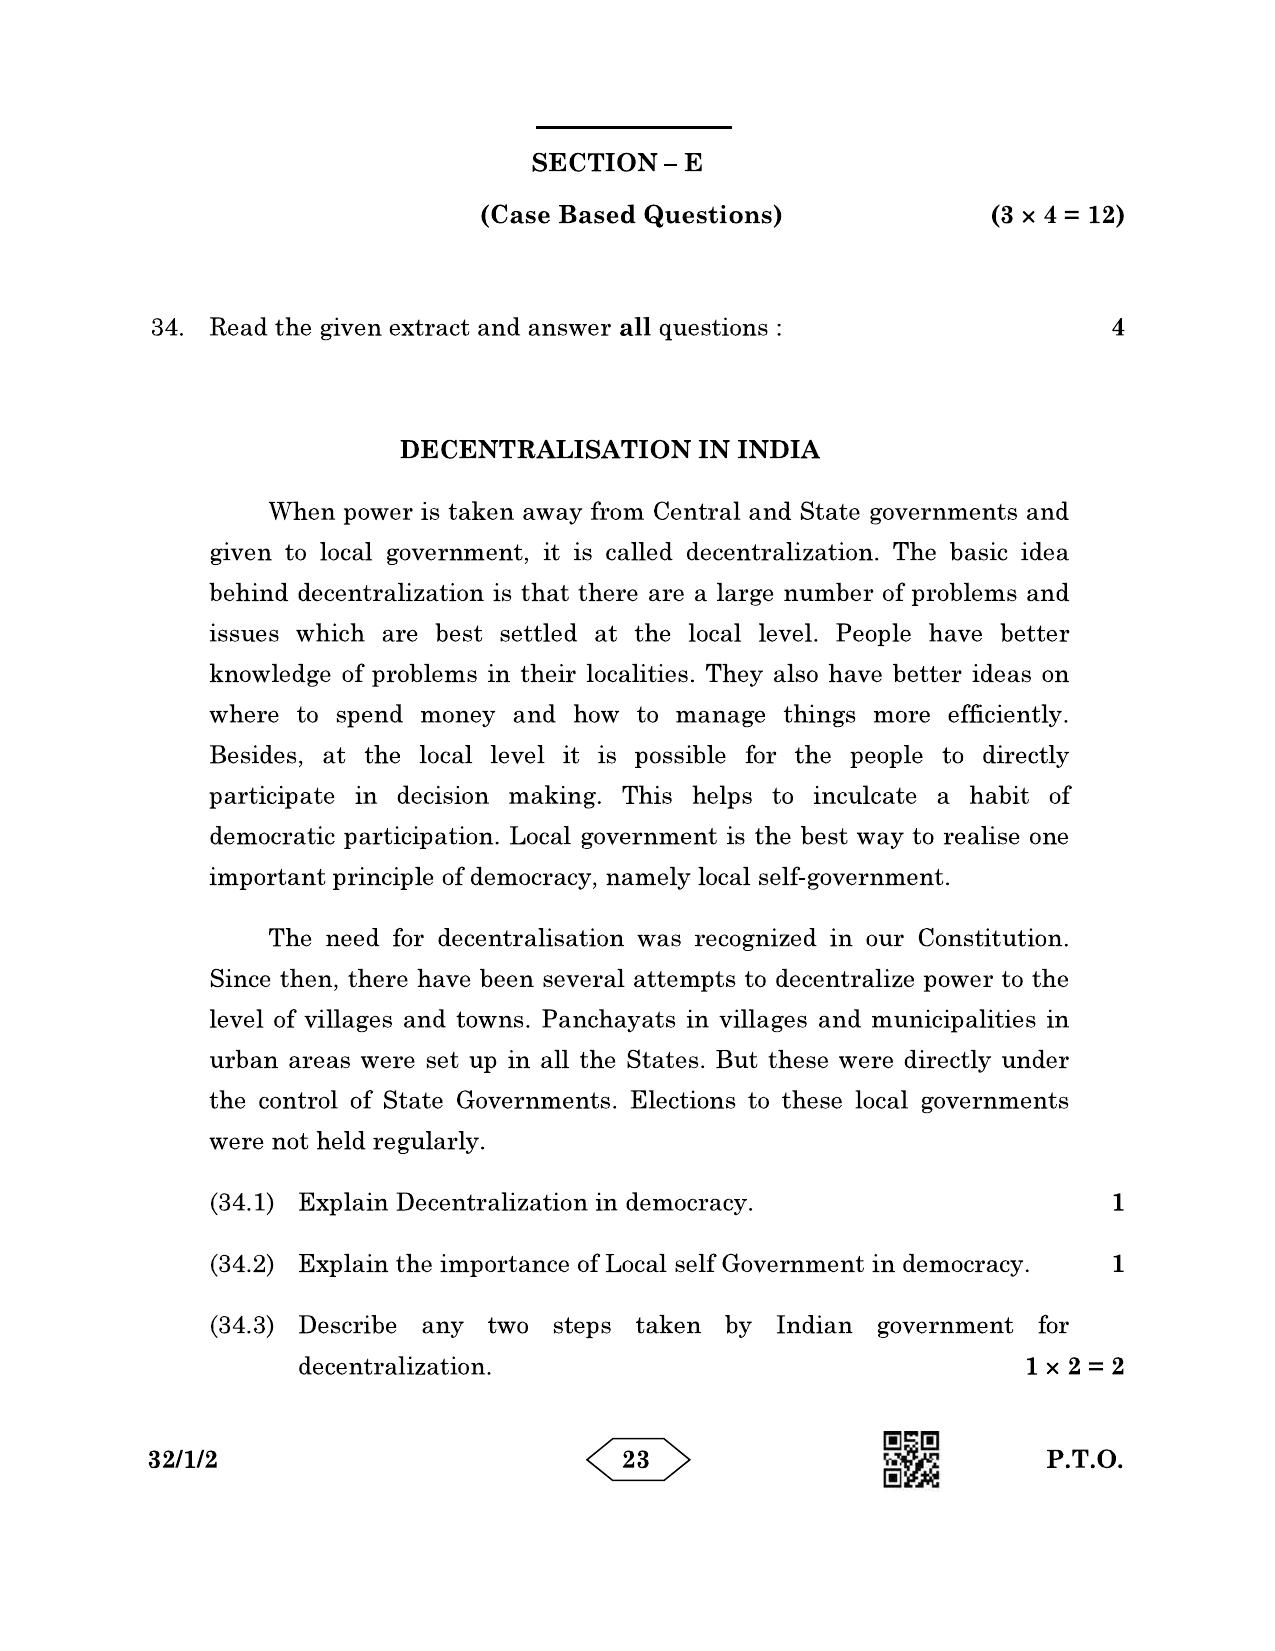 CBSE Class 10 32-1-2 Social Science 2023 Question Paper - Page 23